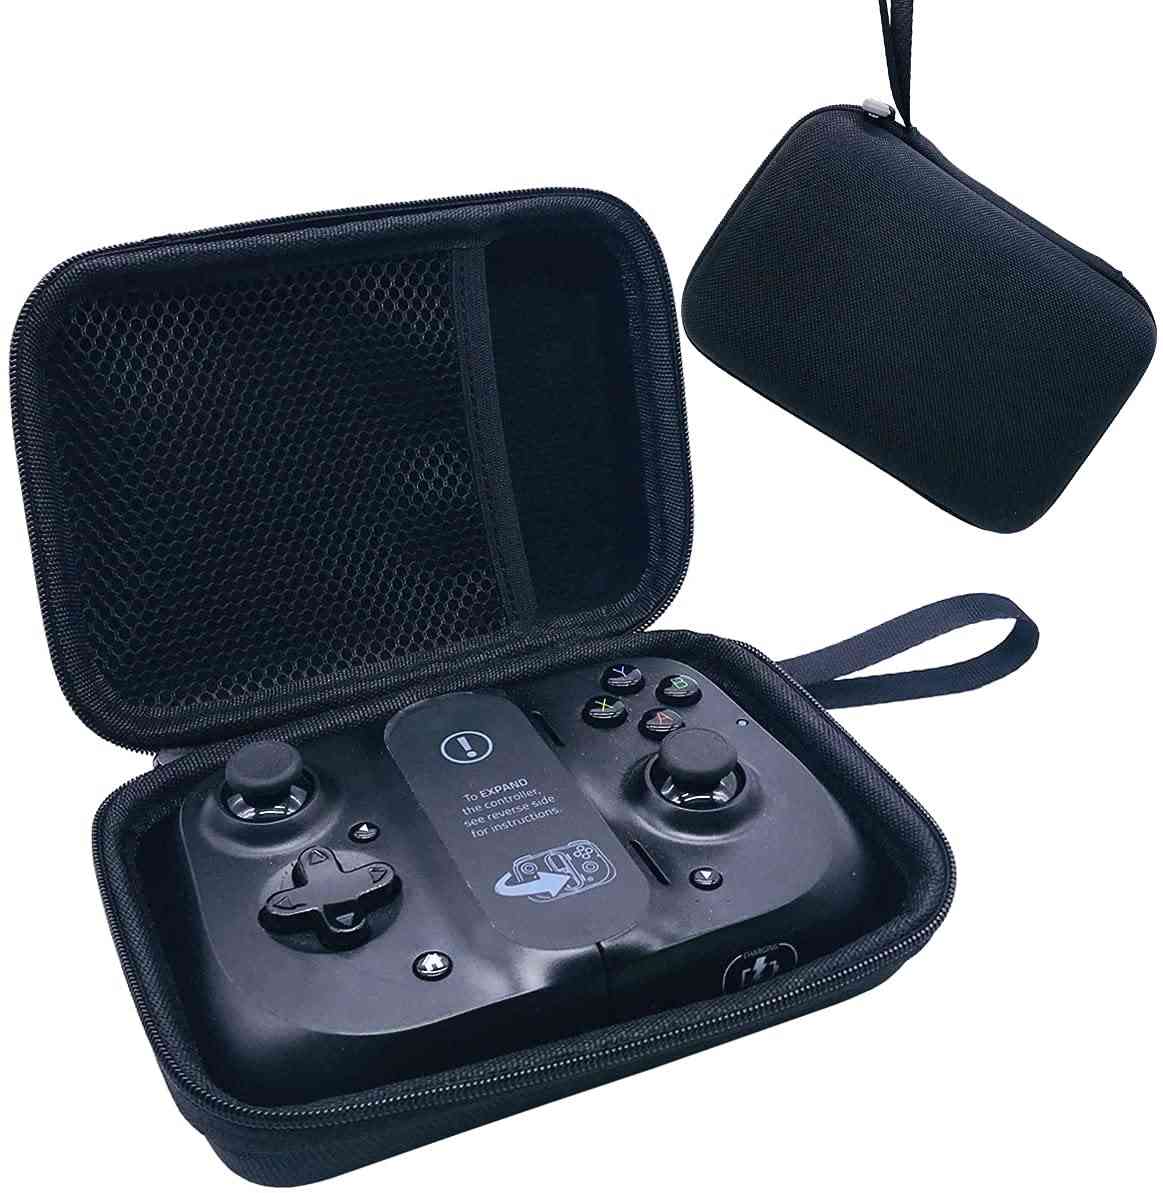 Mobile Game Controller, Storage Travel, Hard Carrying Case